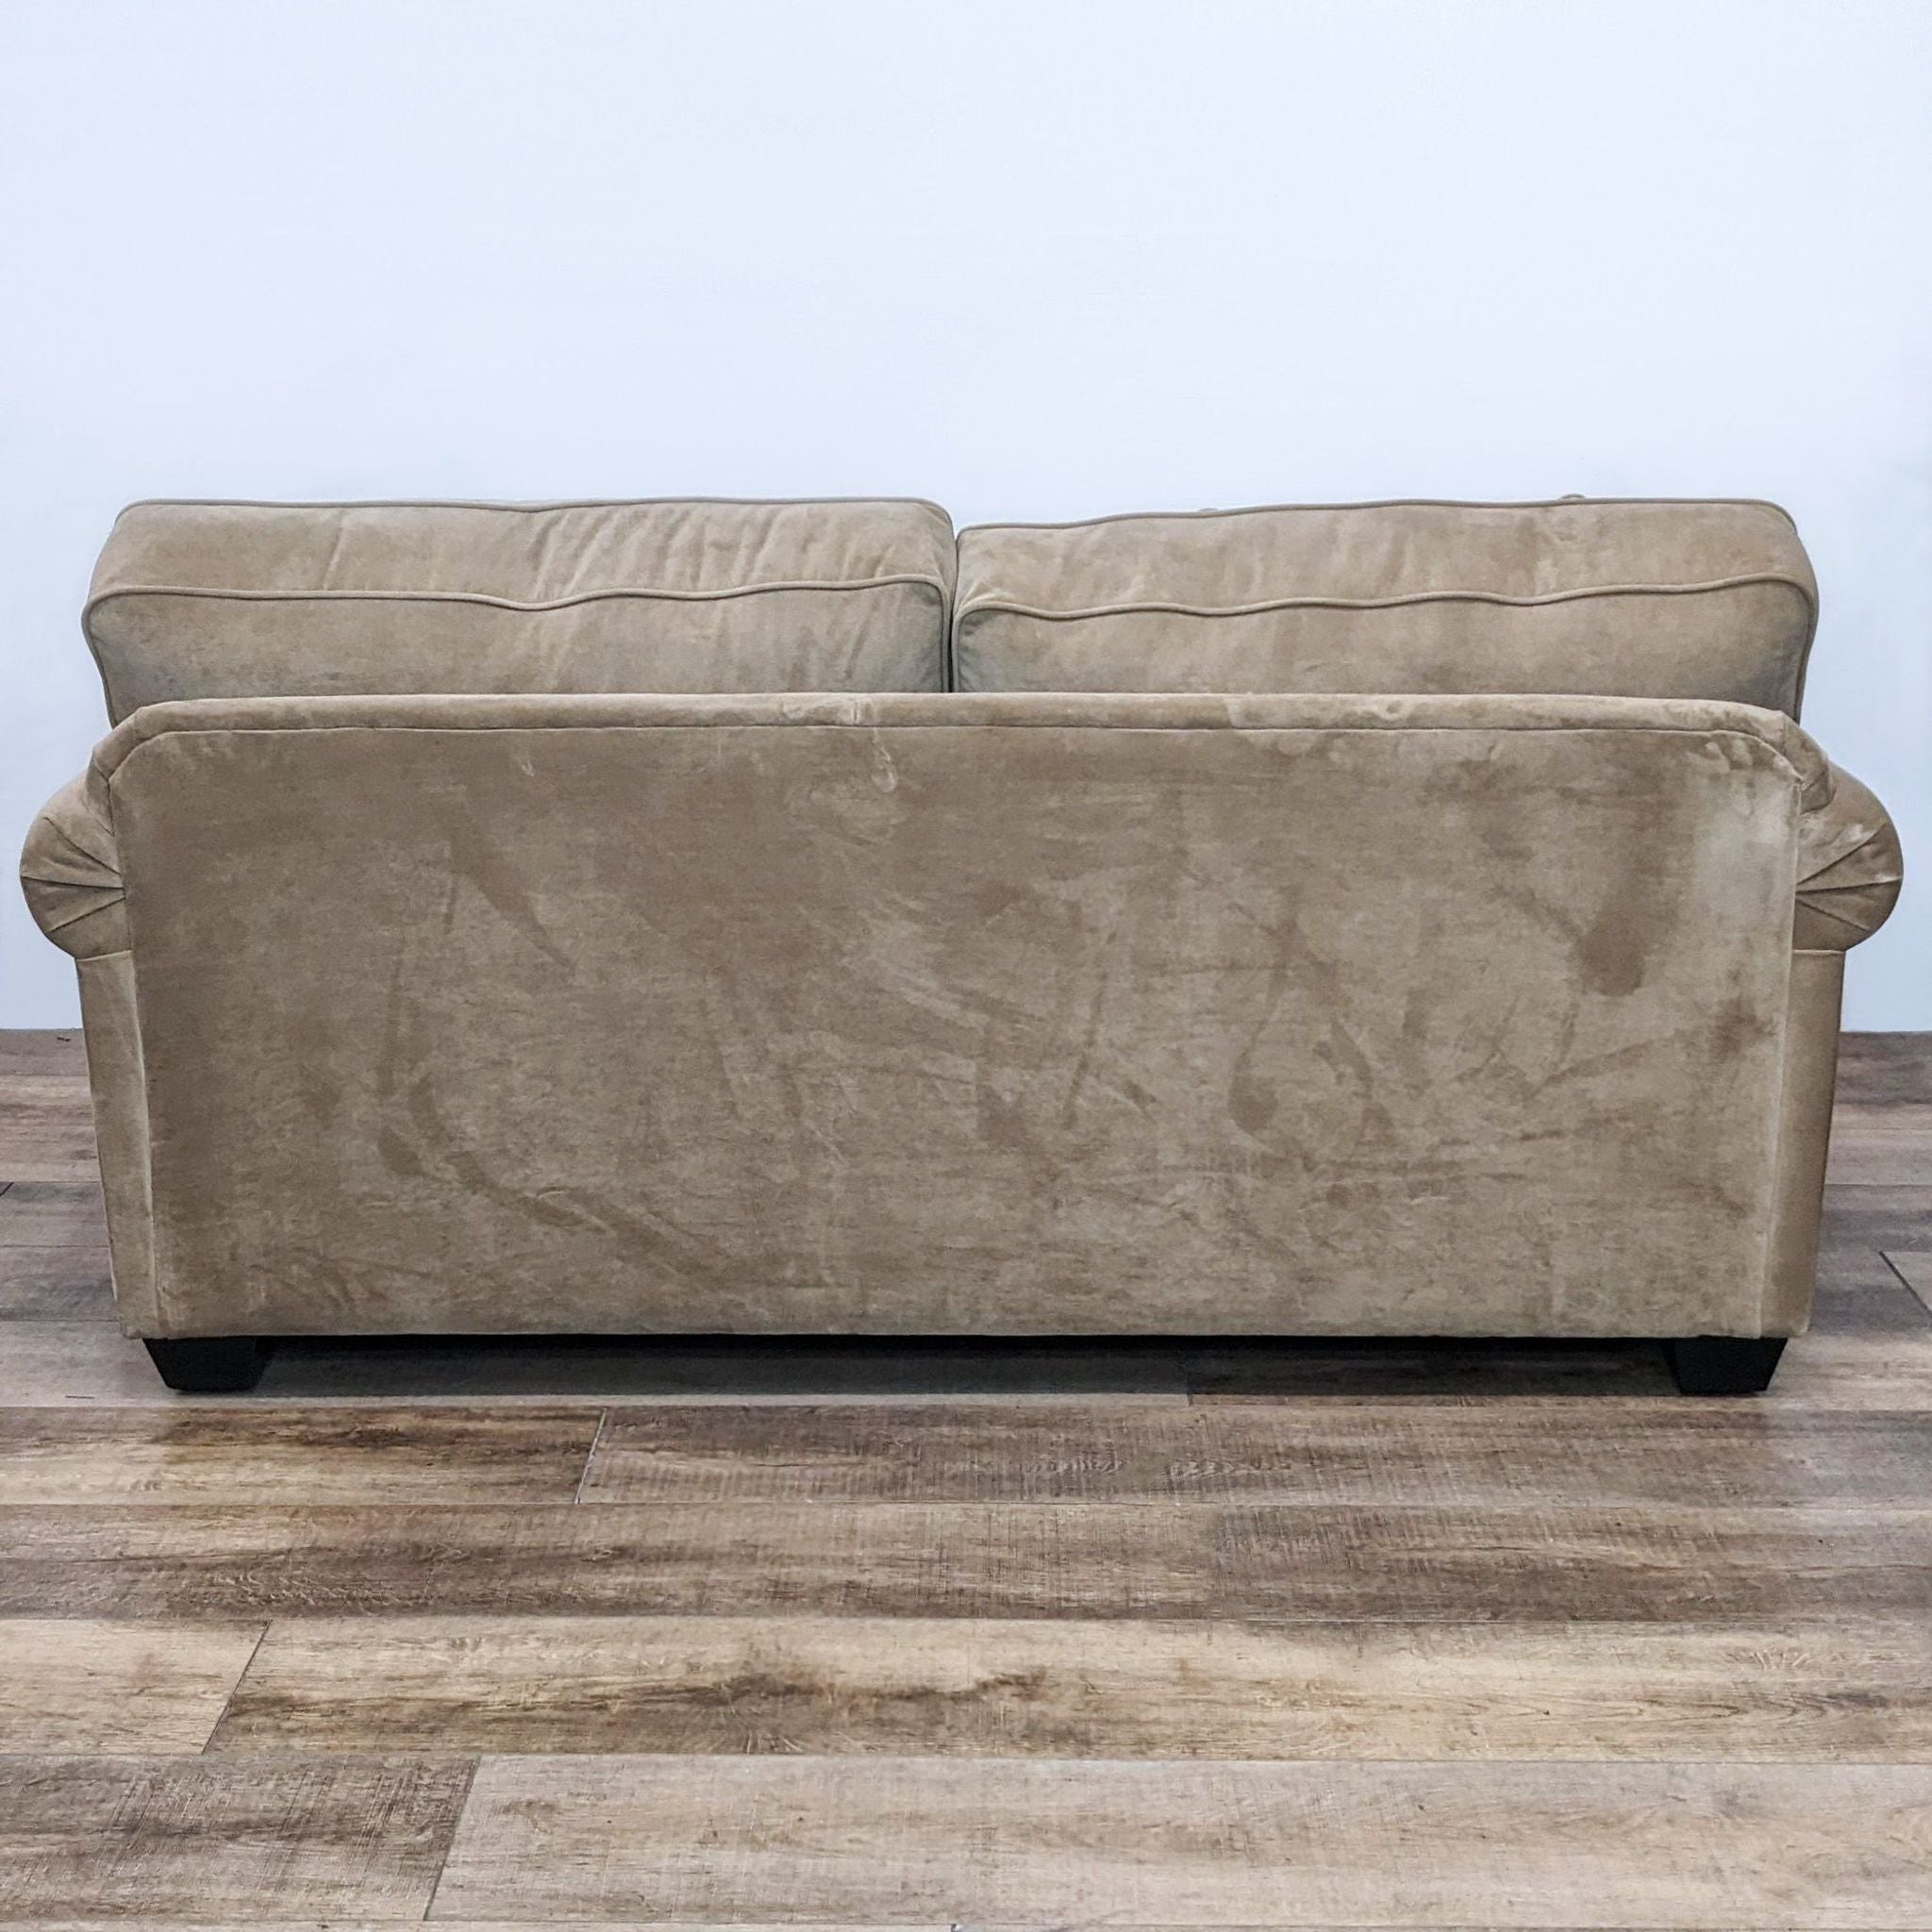 Reperch contemporary classic 3-seat sofa with narrow rolled arms, T back cushions, and dark finish feet on a wood floor.